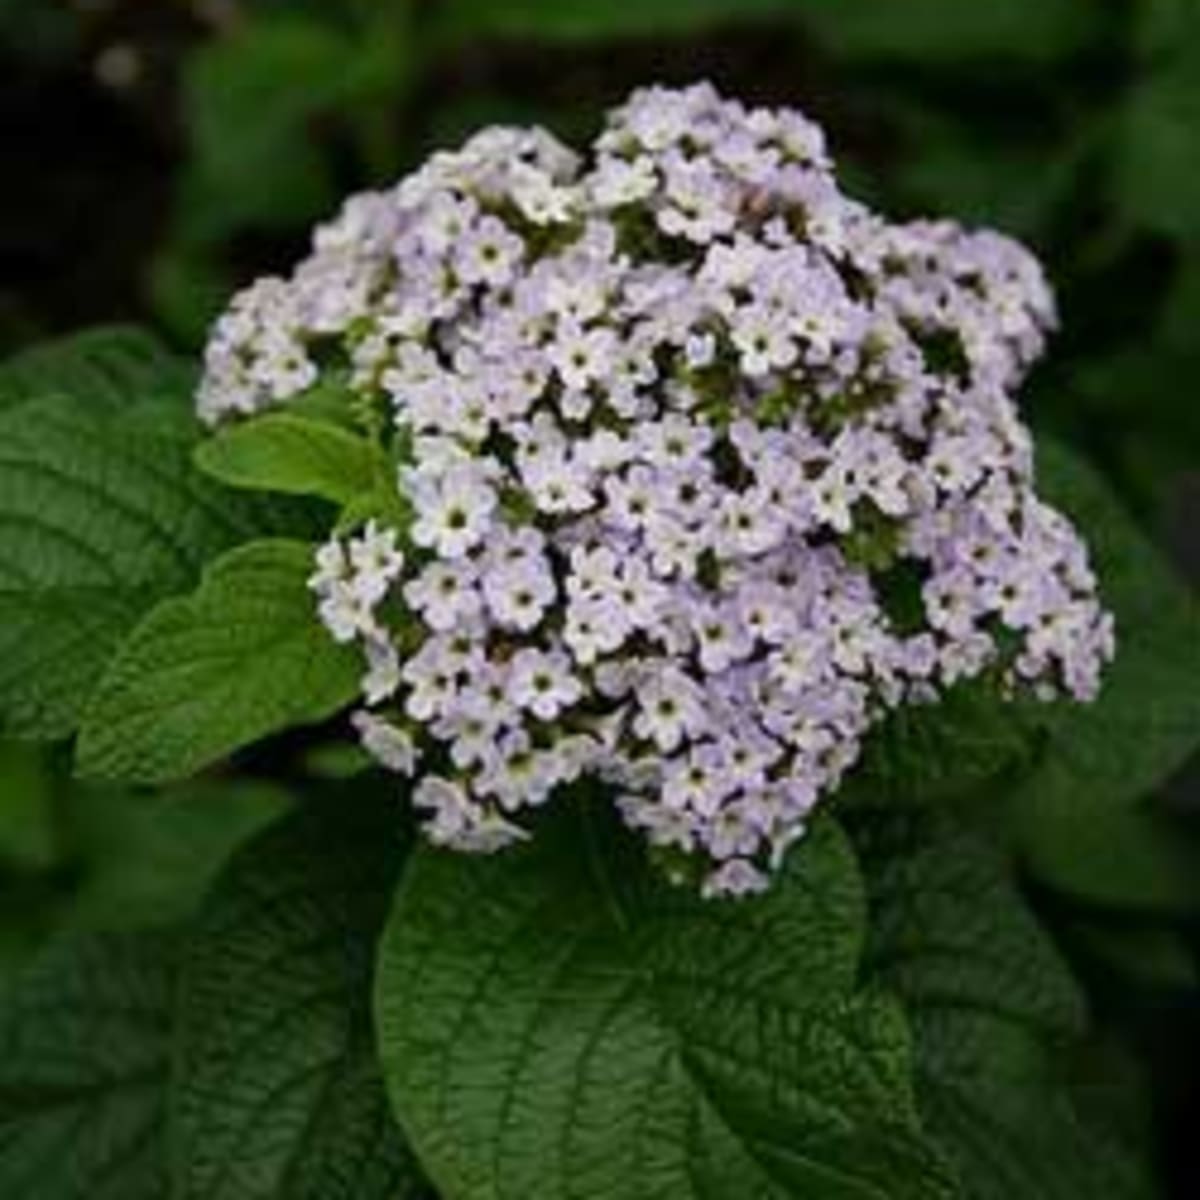 grow heliotrope for its most fragrant annual flowers - horticulture